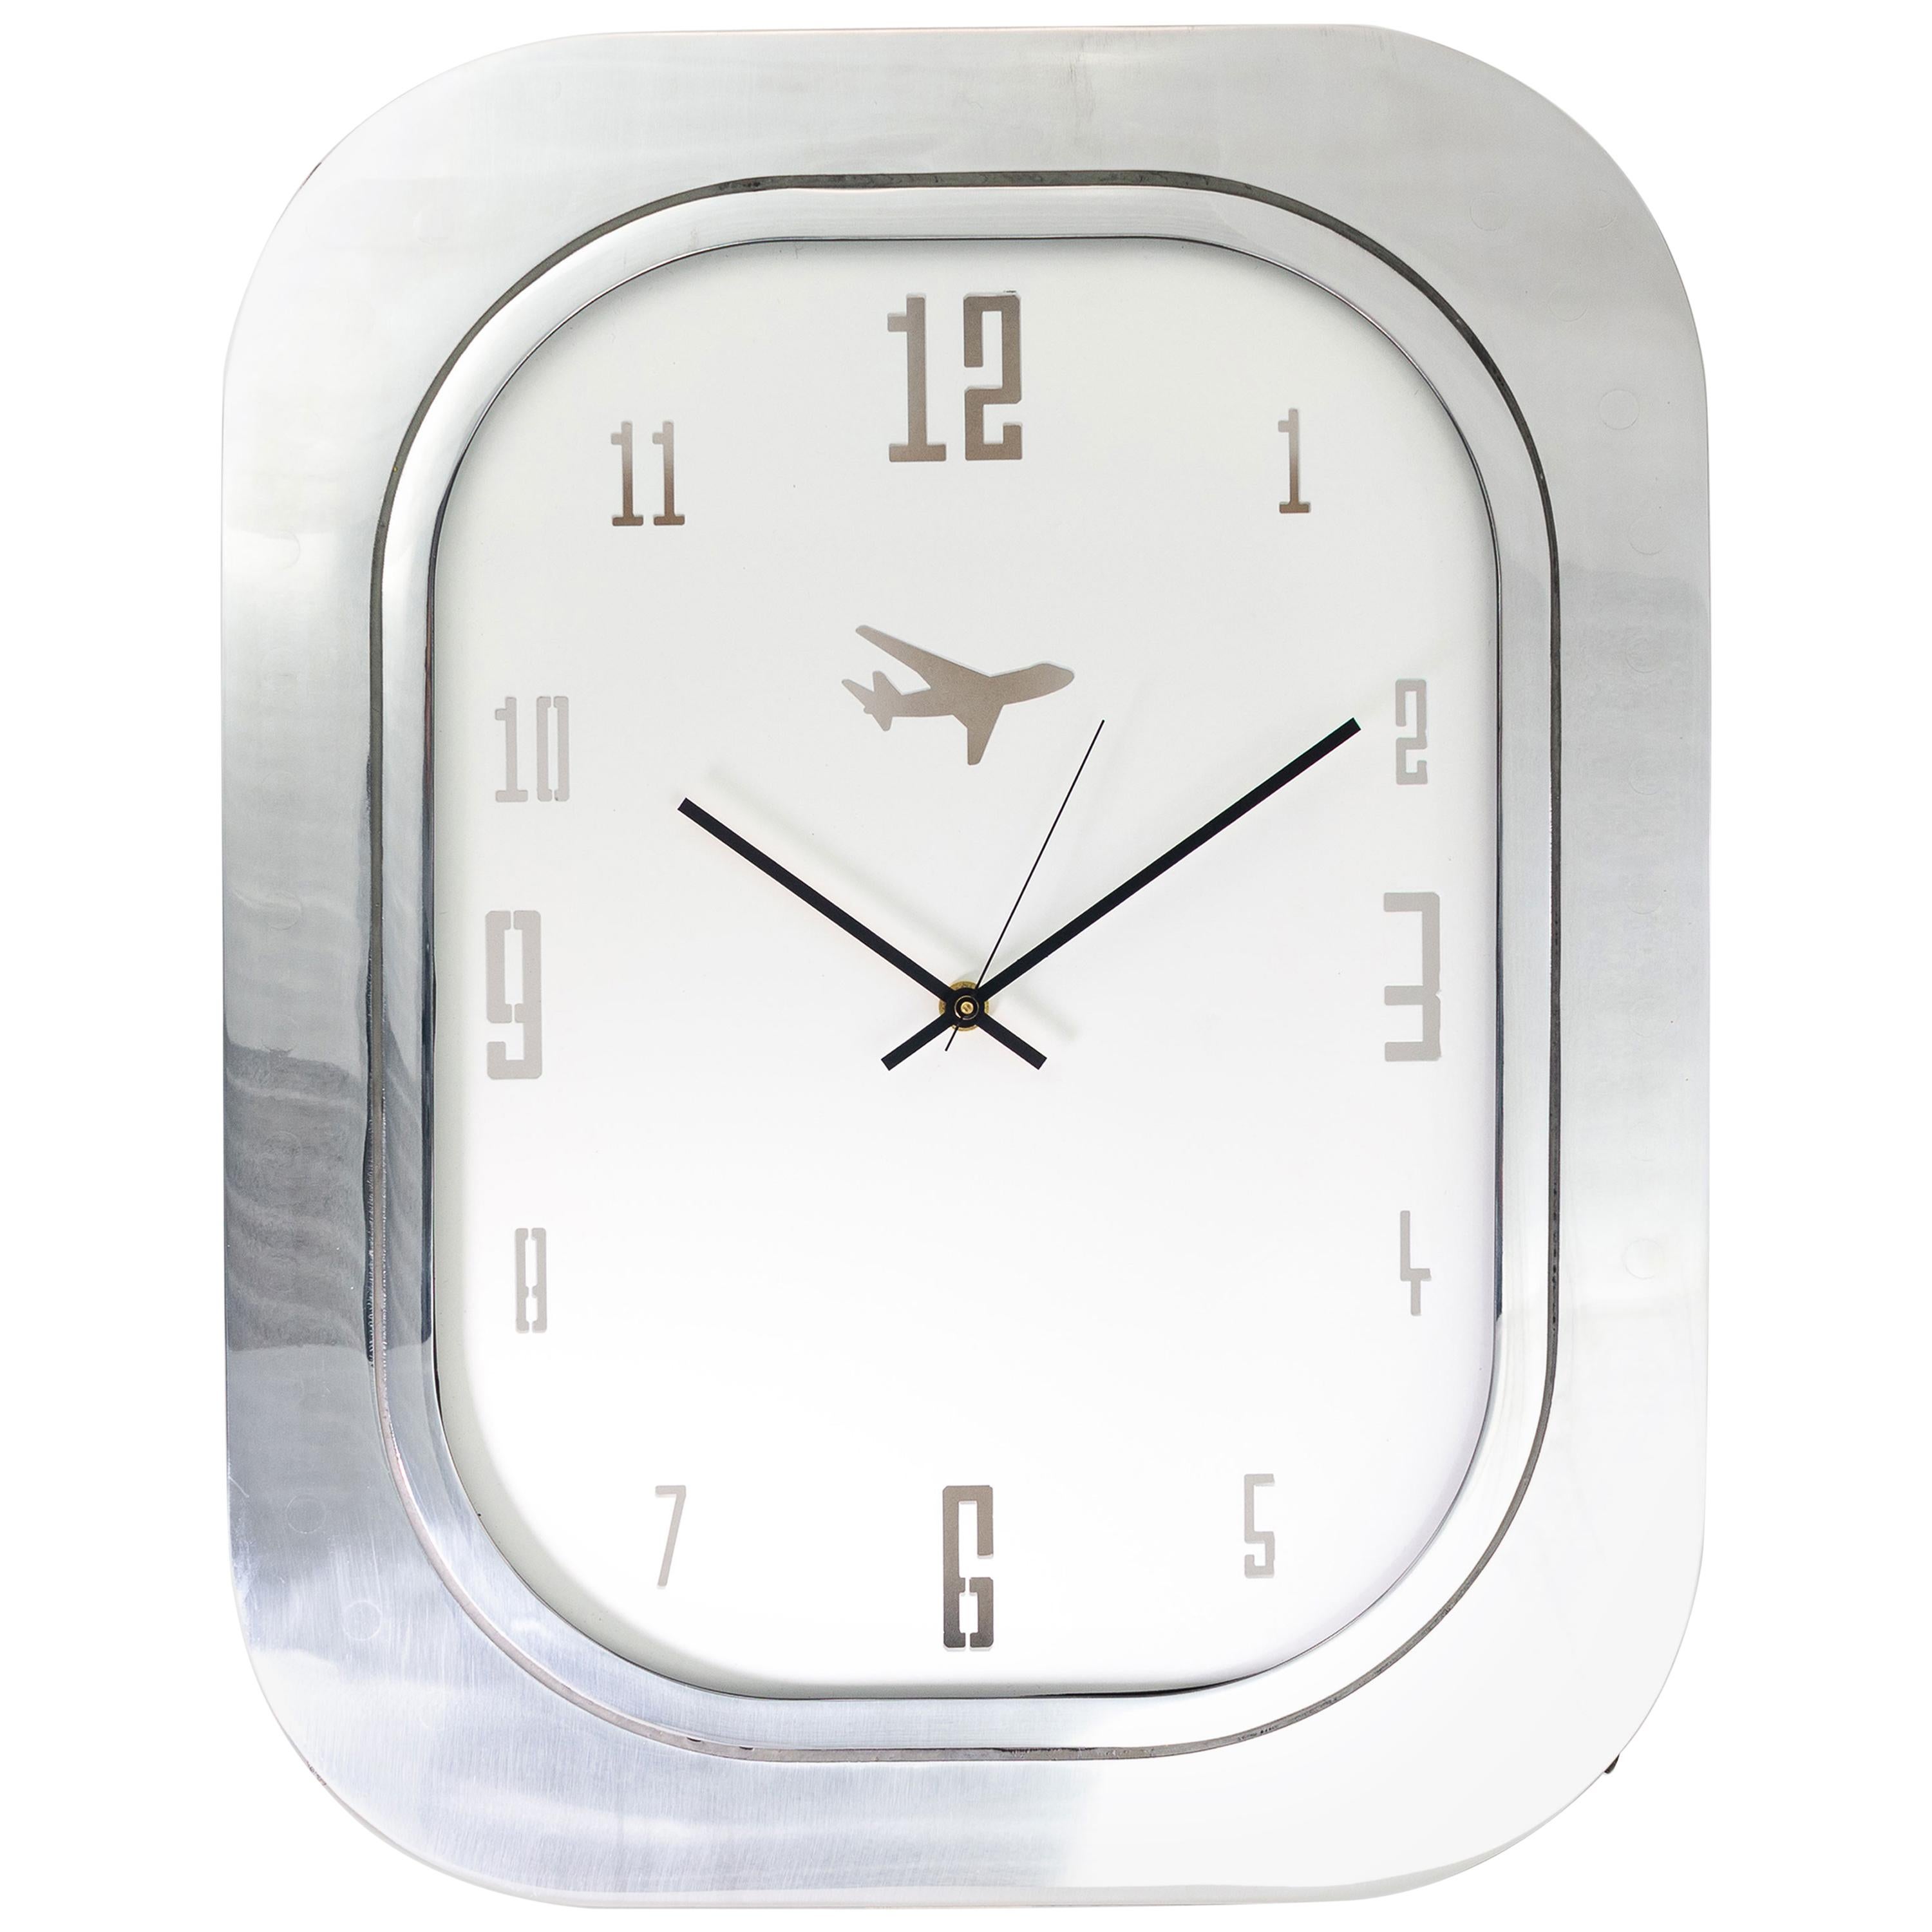 #003-Boeing 747 Window Clock, Polished Aluminium and White Face For Sale